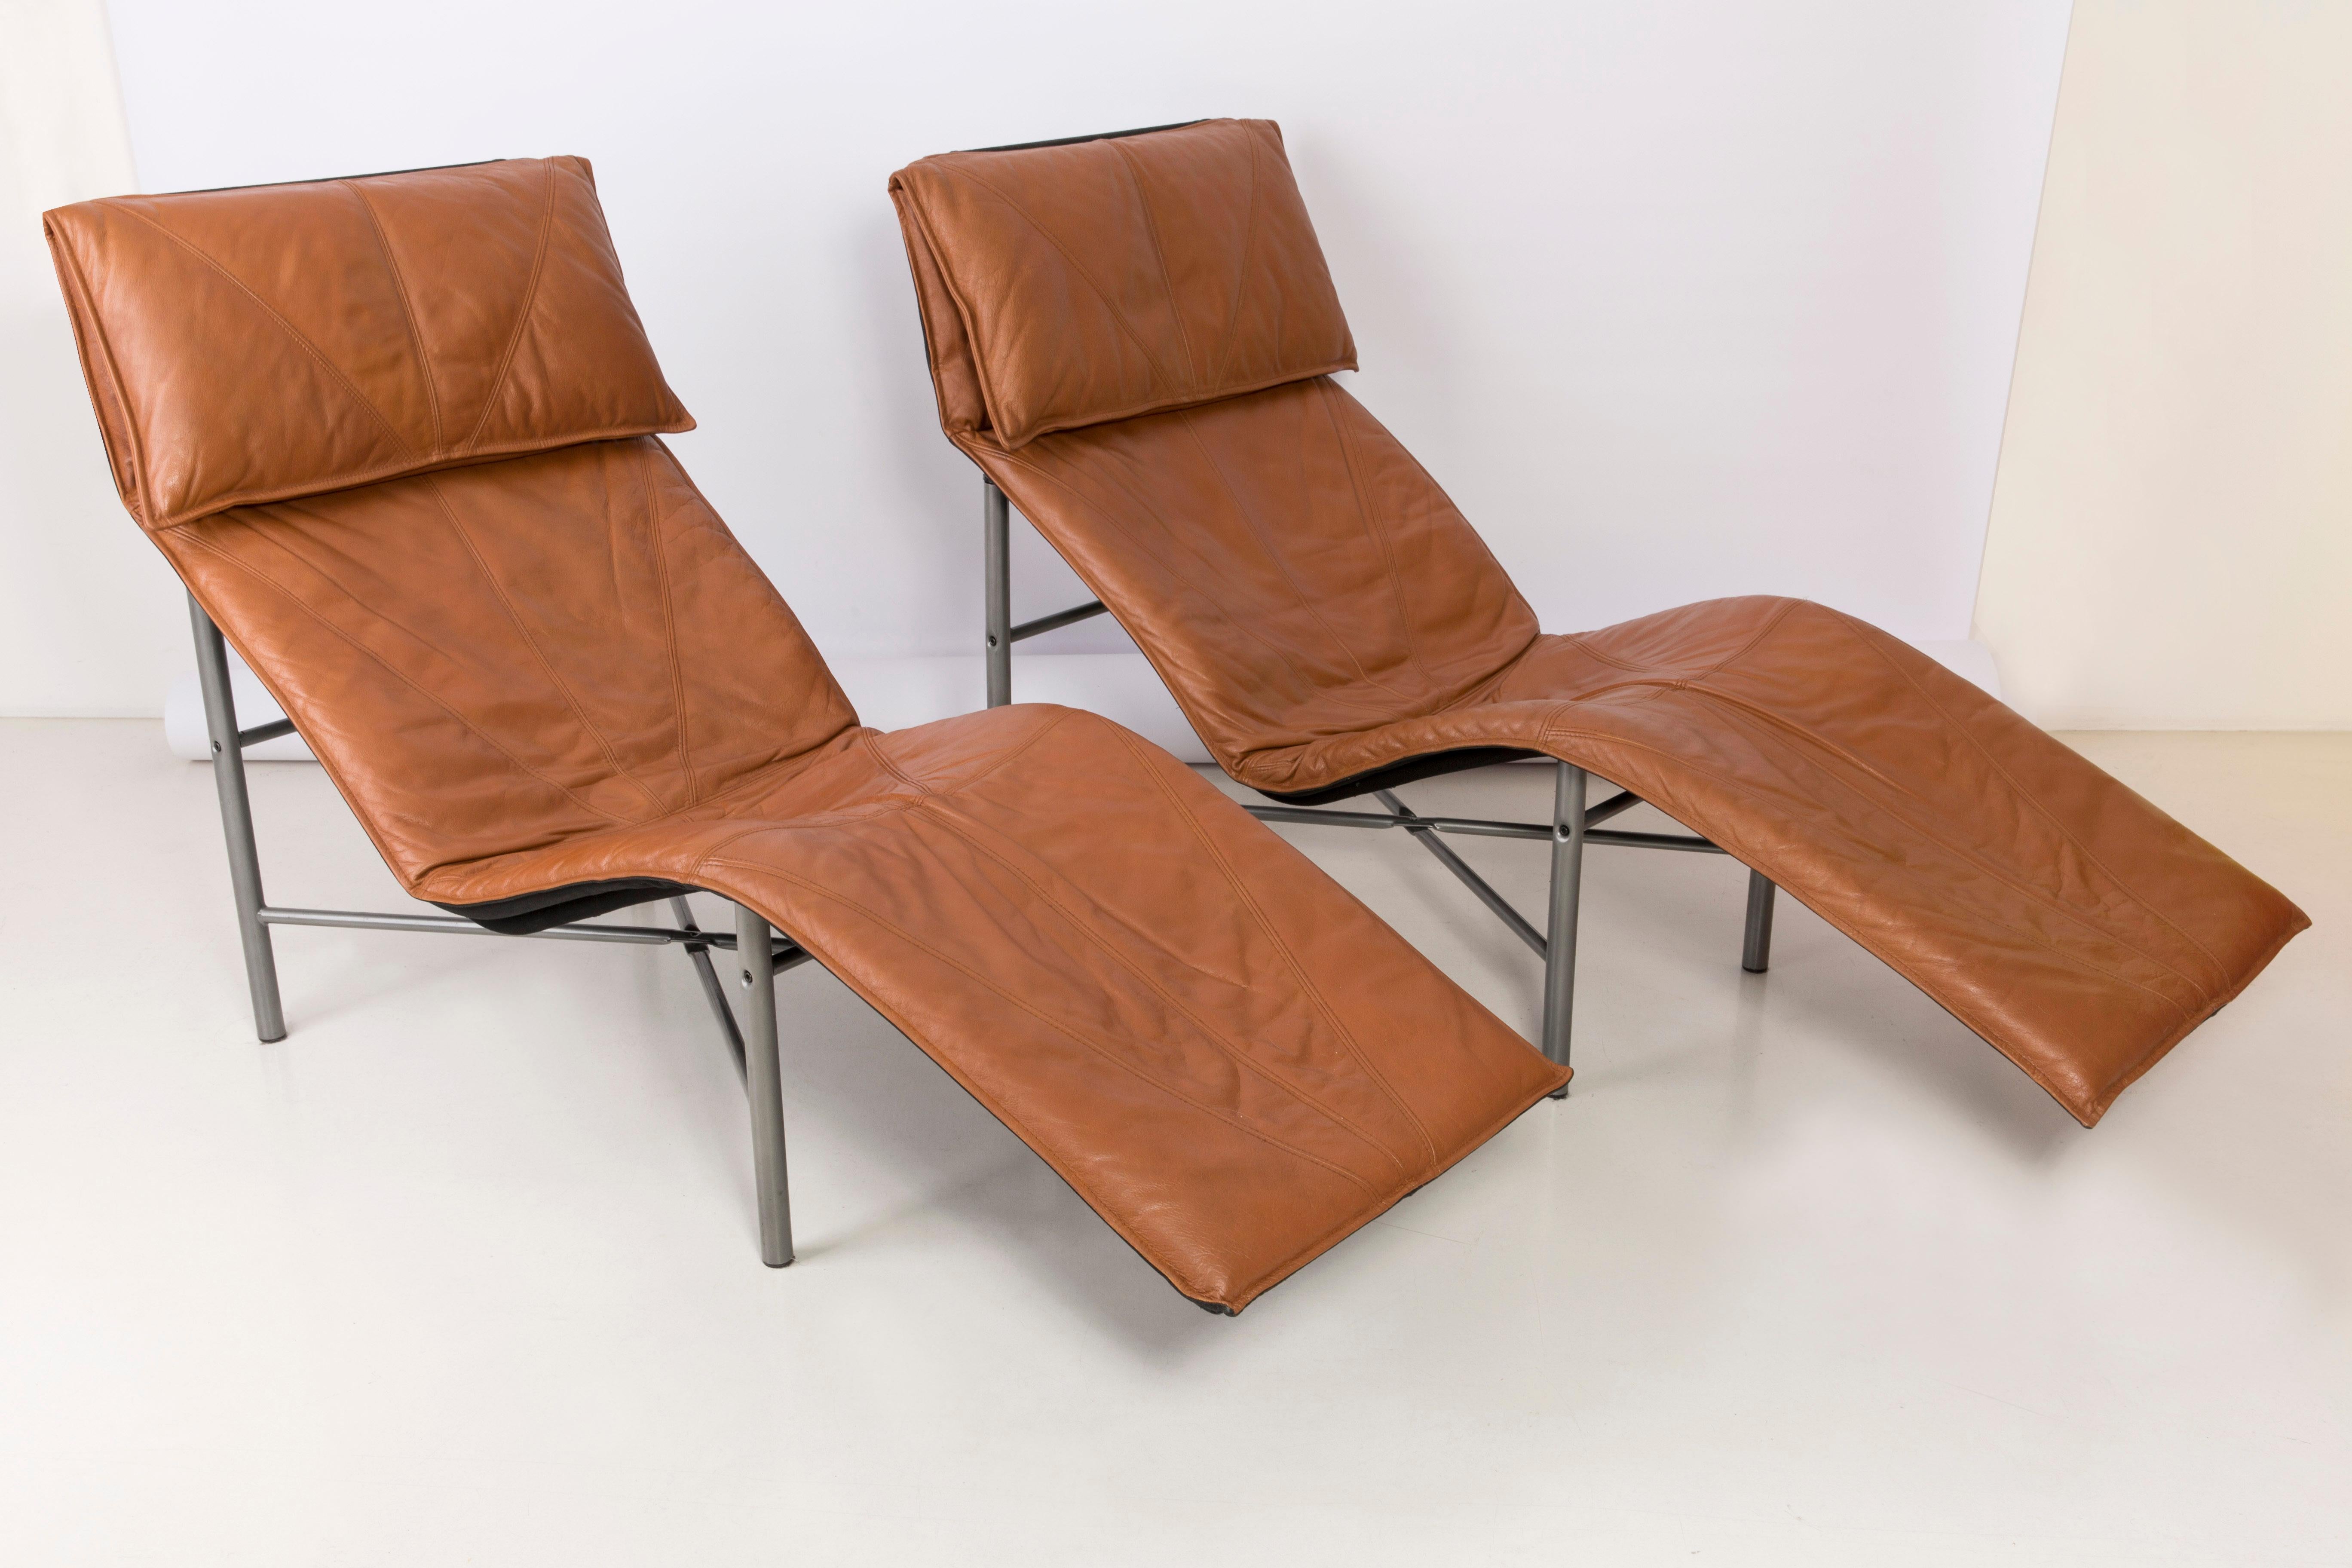 Midcentury Danish Modern Brown Leather Chaise Lounge Chair by Tord Björklund For Sale 1